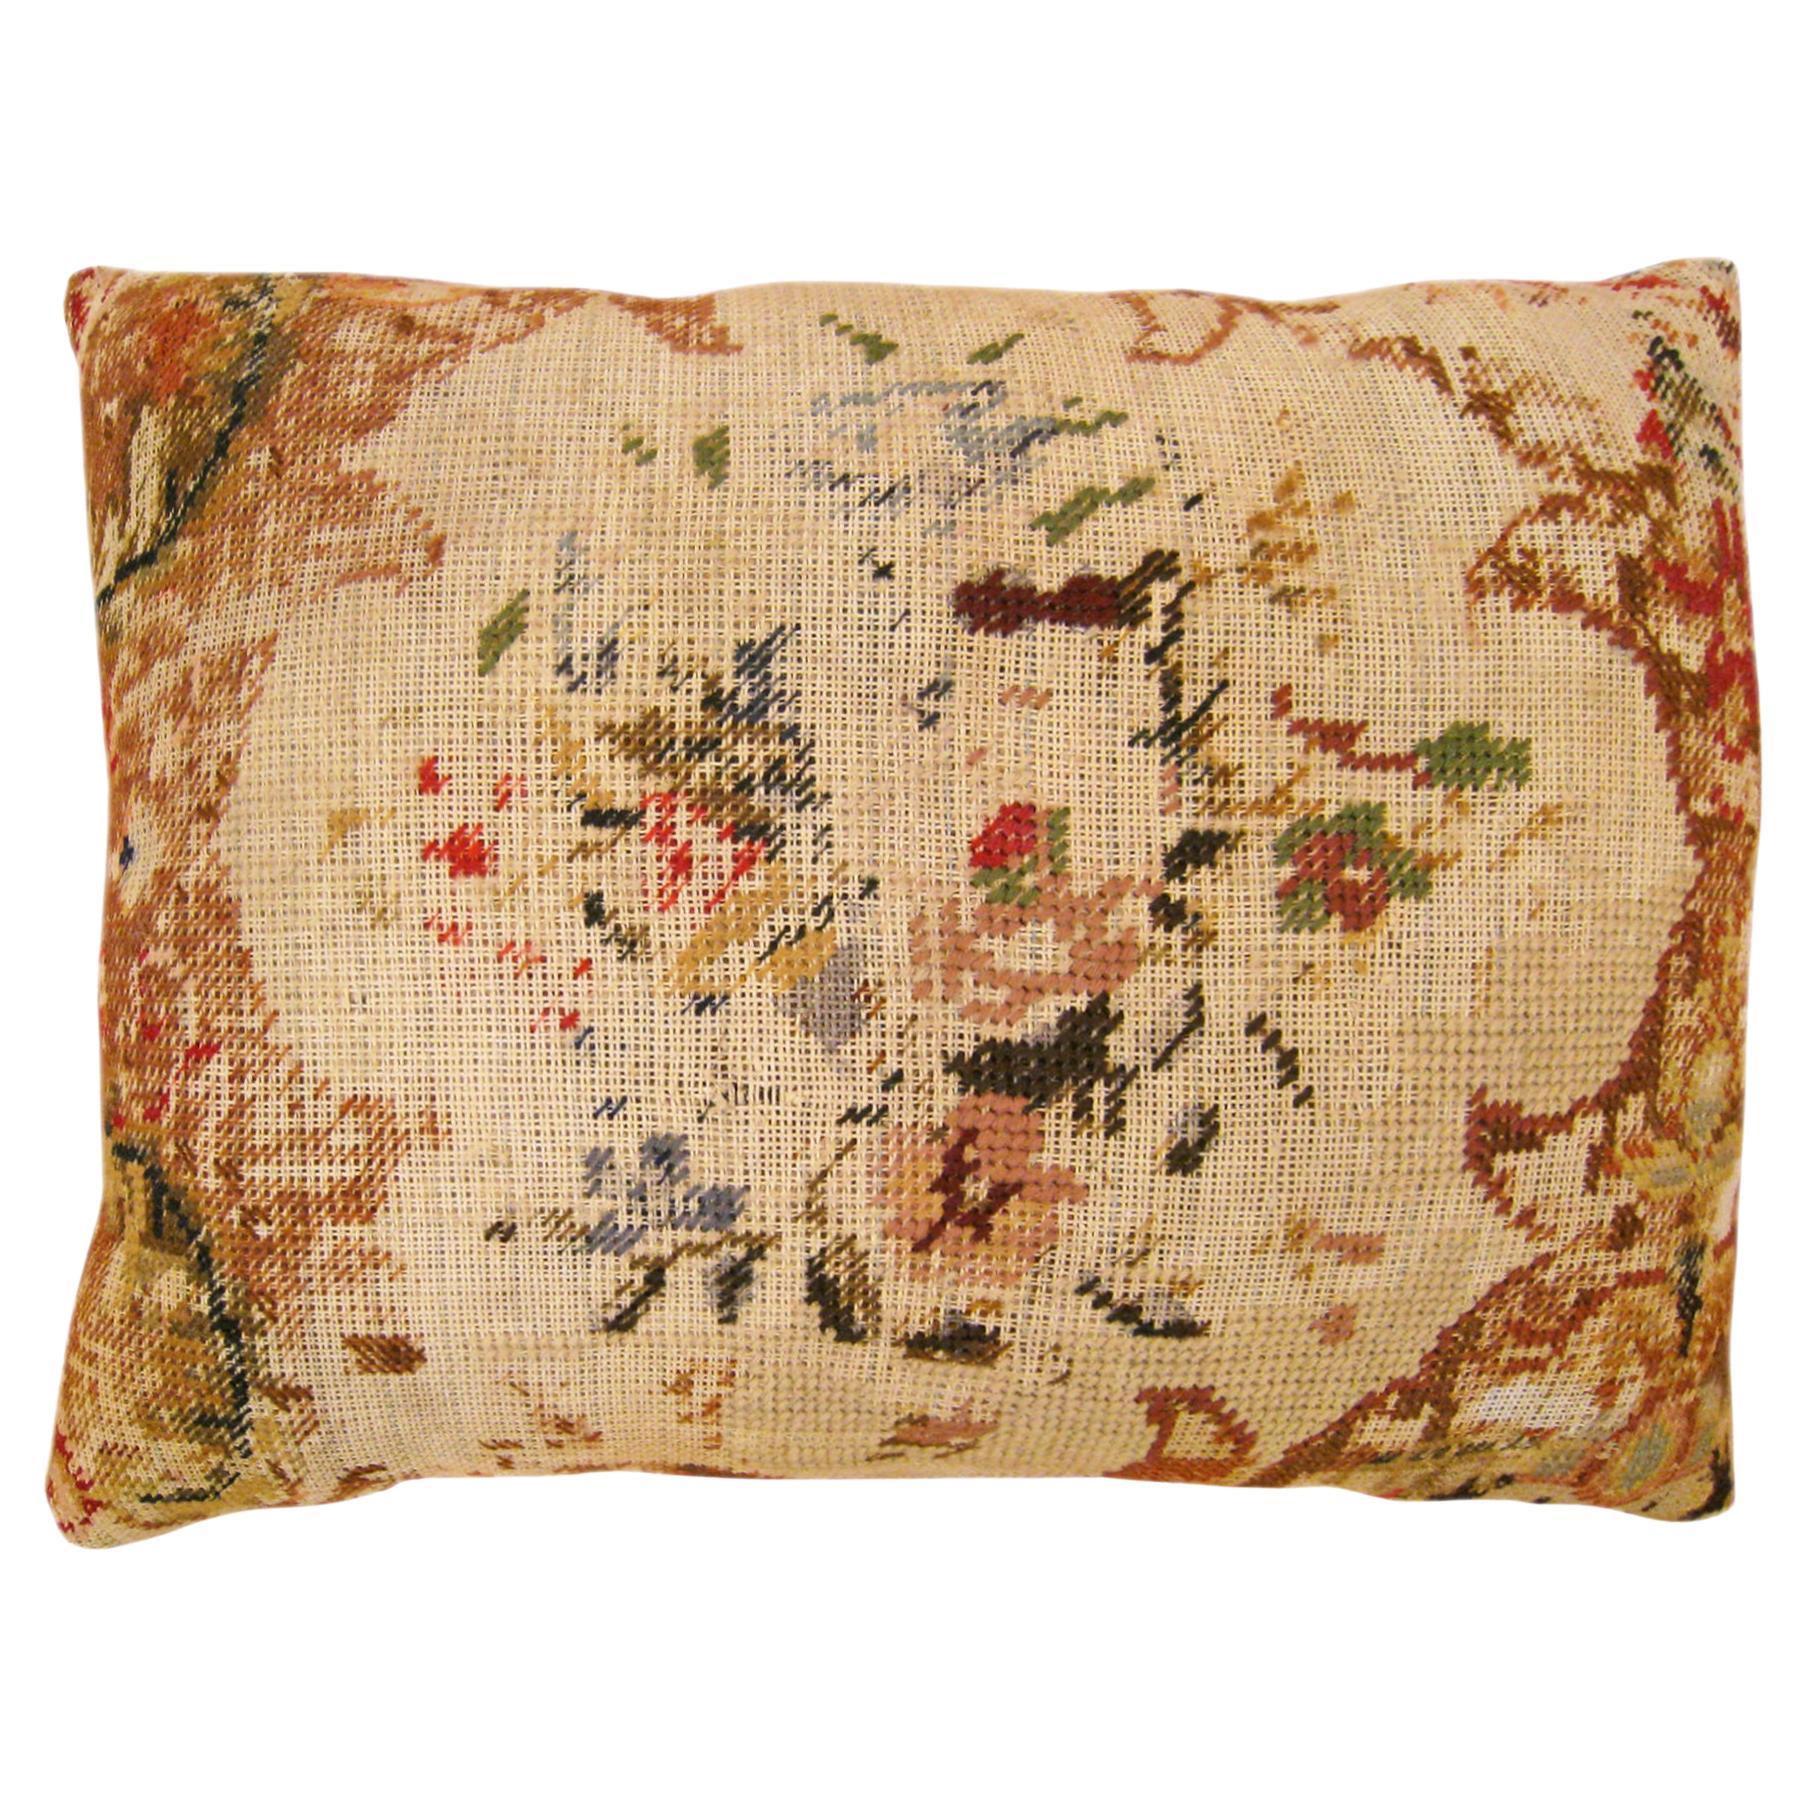 Antique Decorative English Needlepoint Rug Pillow with Floral Elements For Sale